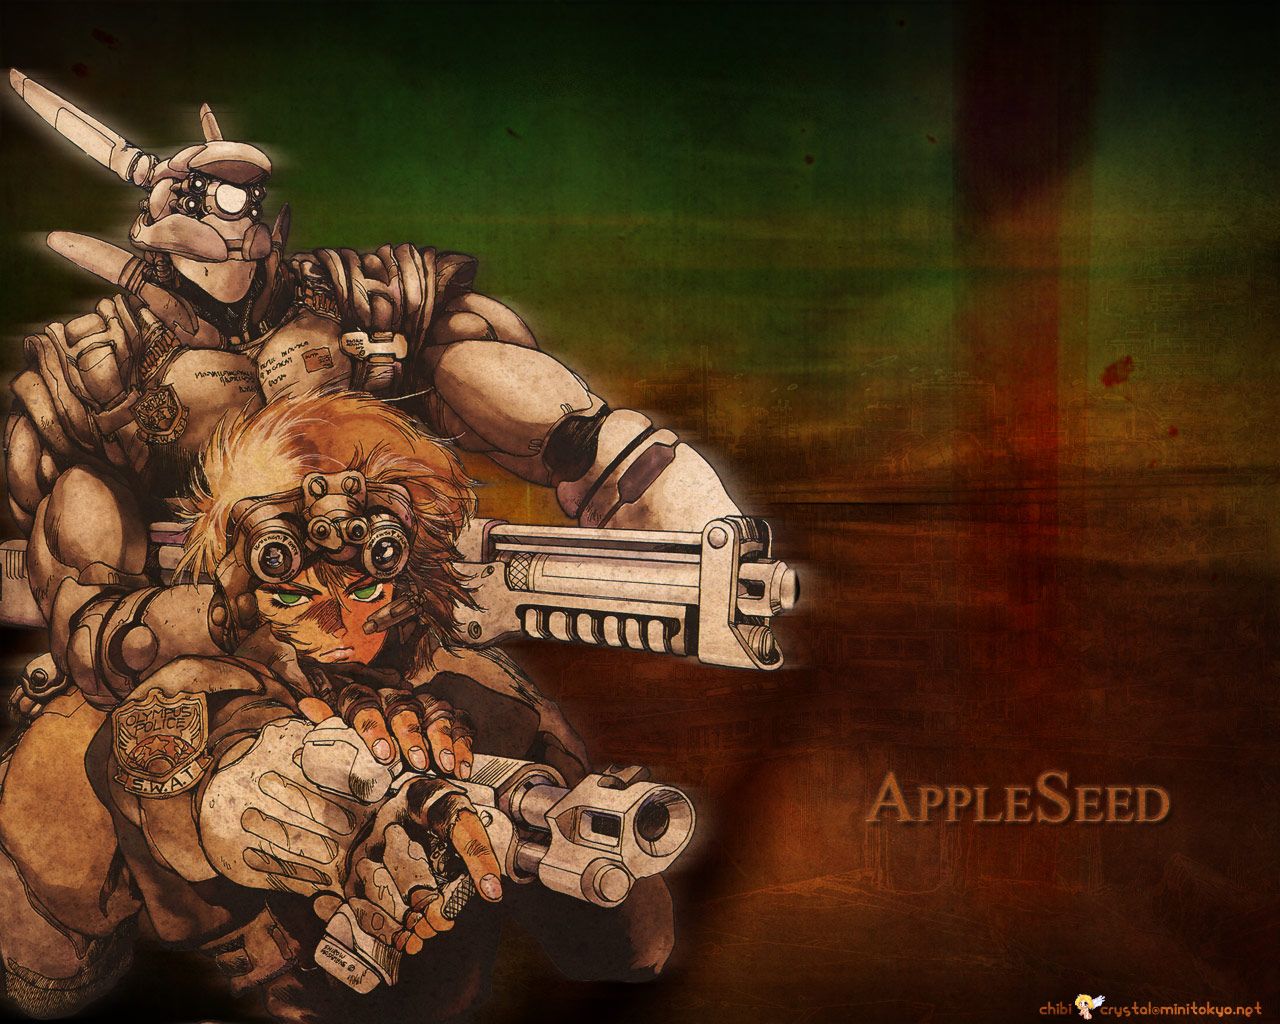 Appleseed and Scan Gallery